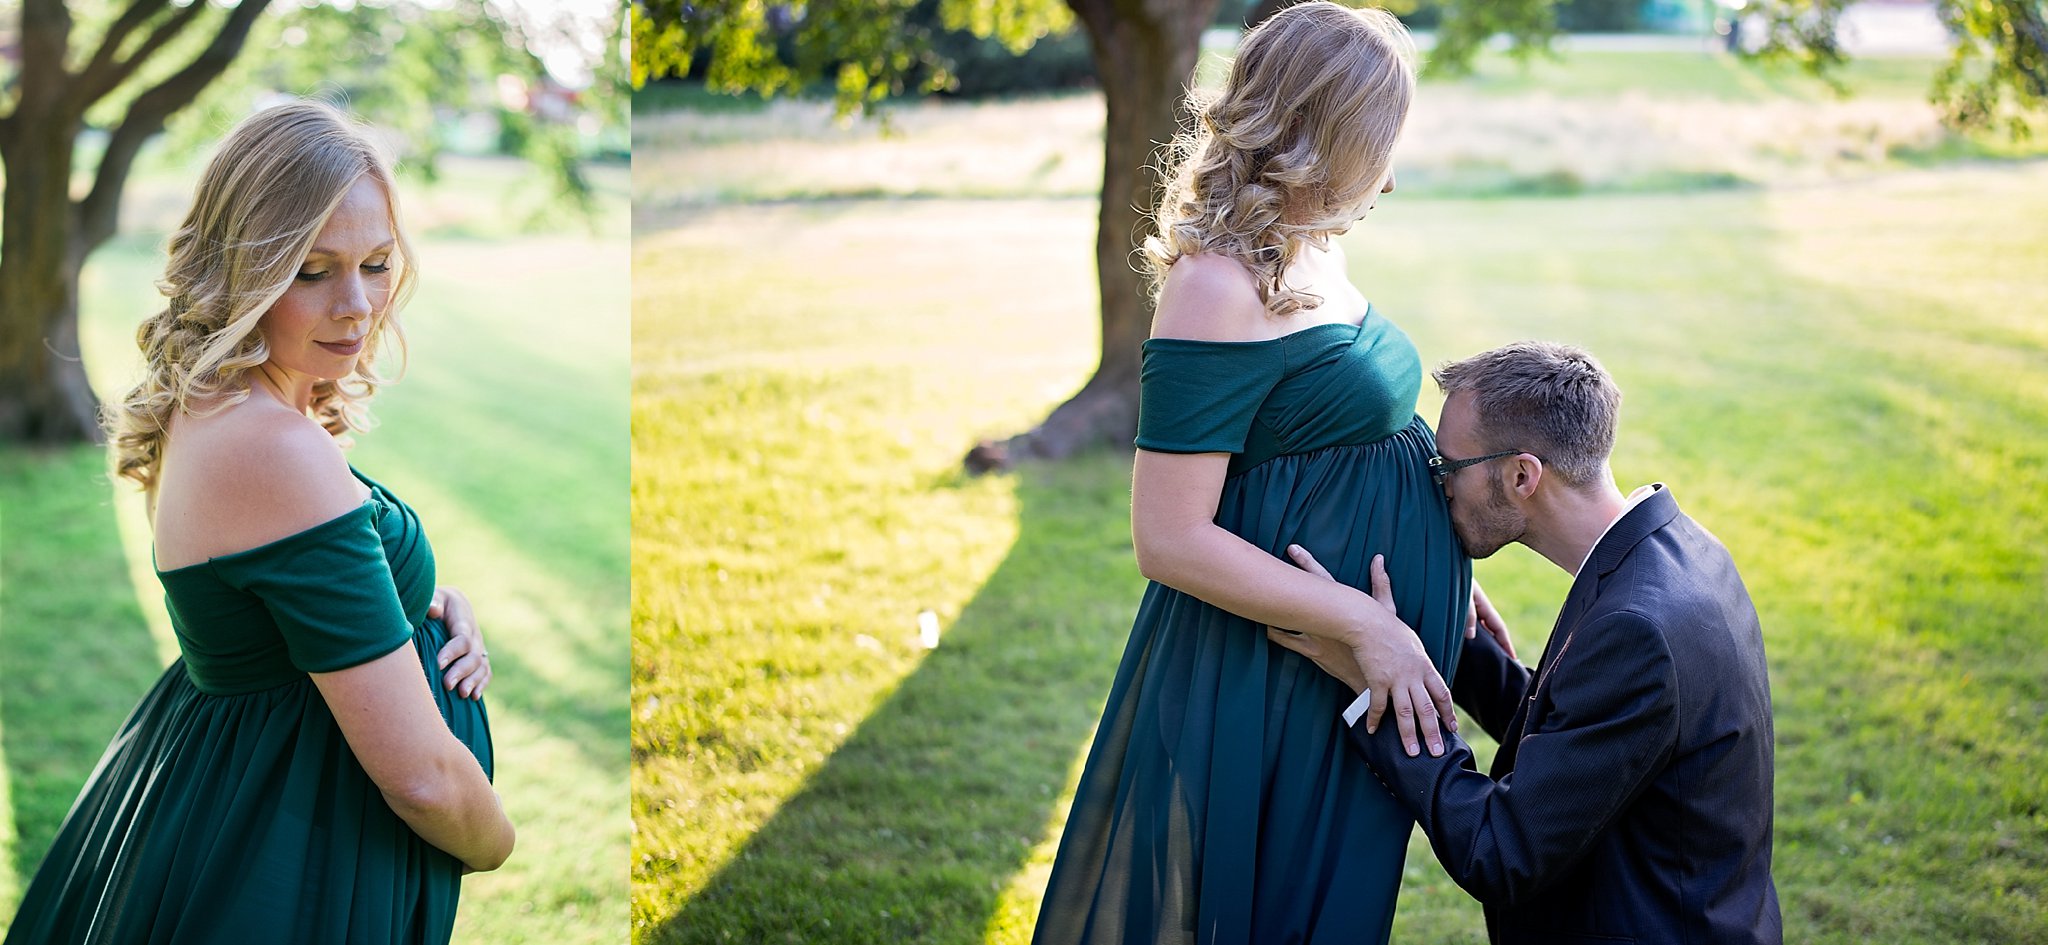 Jennifer Blaak Photography, Hamilton Maternity Photographer, maternity session in Gage Park in Hamilton, Dad kissing moms baby belly